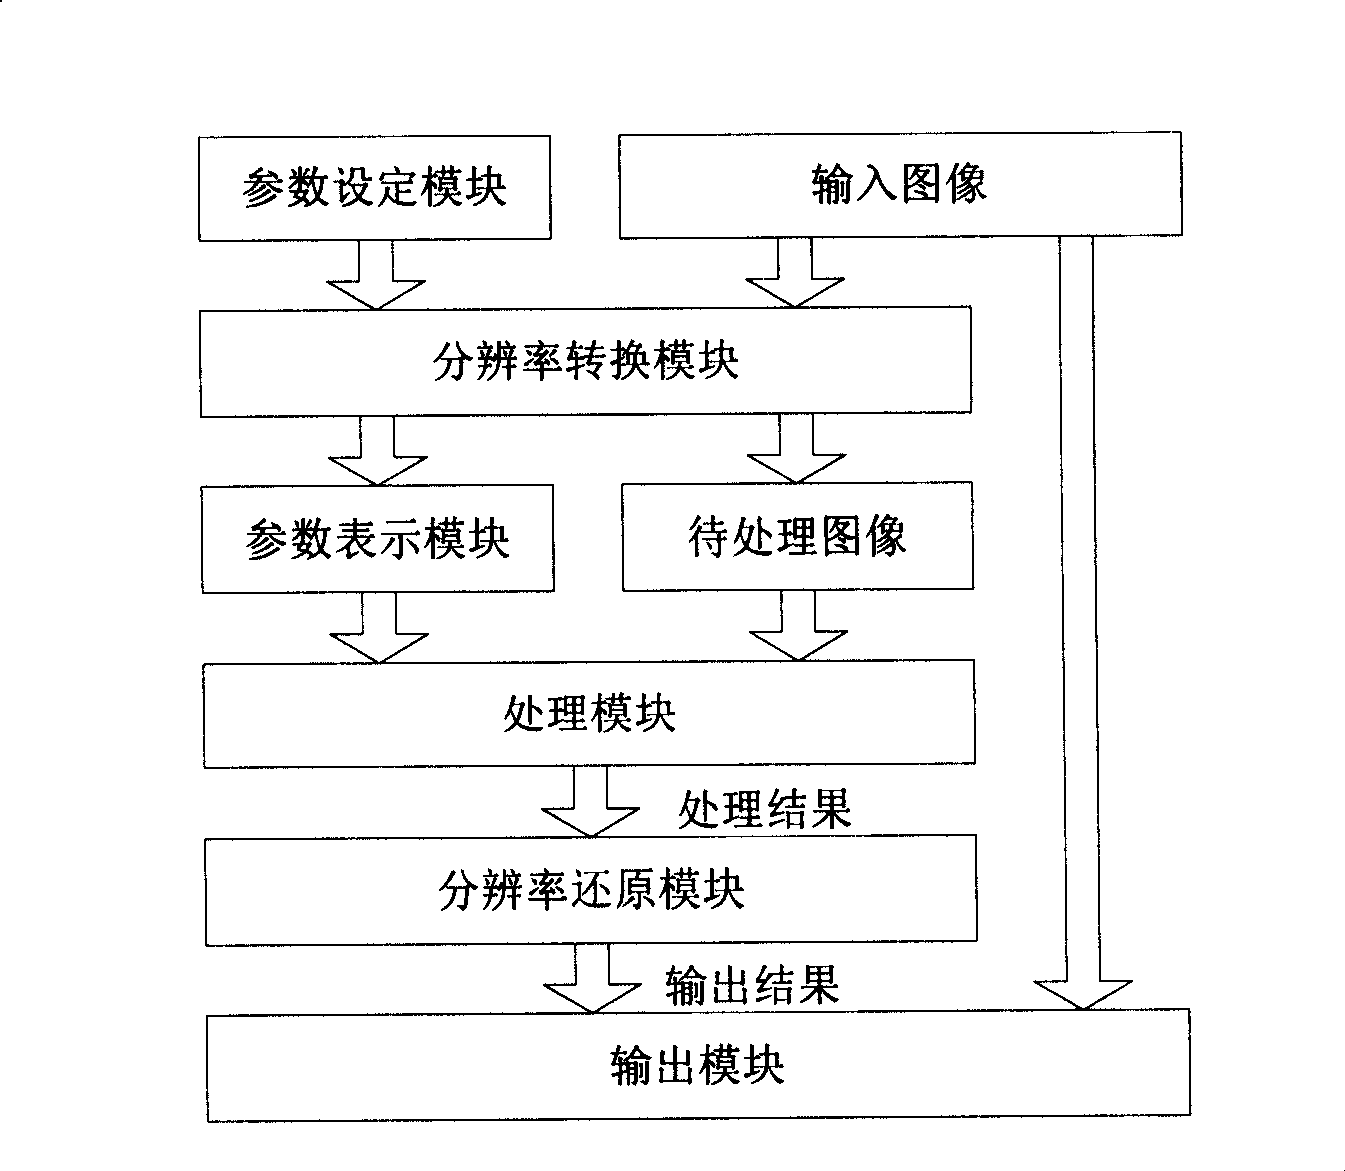 Intelligent traffic analysis system and application system thereof